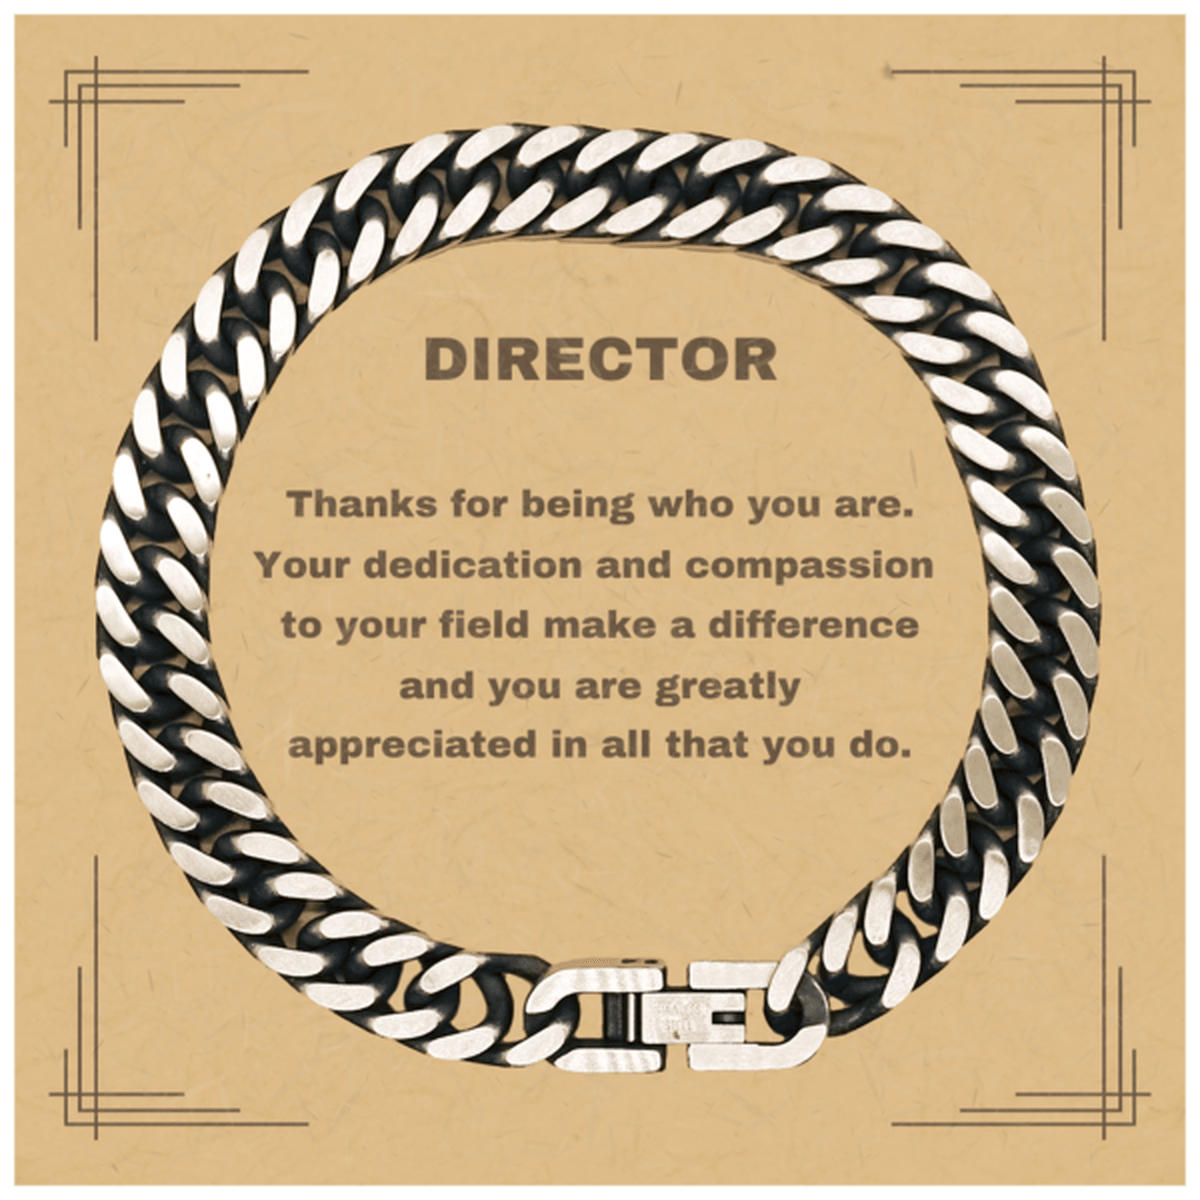 Director Cuban Chain Link Bracelet - Thanks for being who you are - Birthday Christmas Jewelry Gifts Coworkers Colleague Boss - Mallard Moon Gift Shop